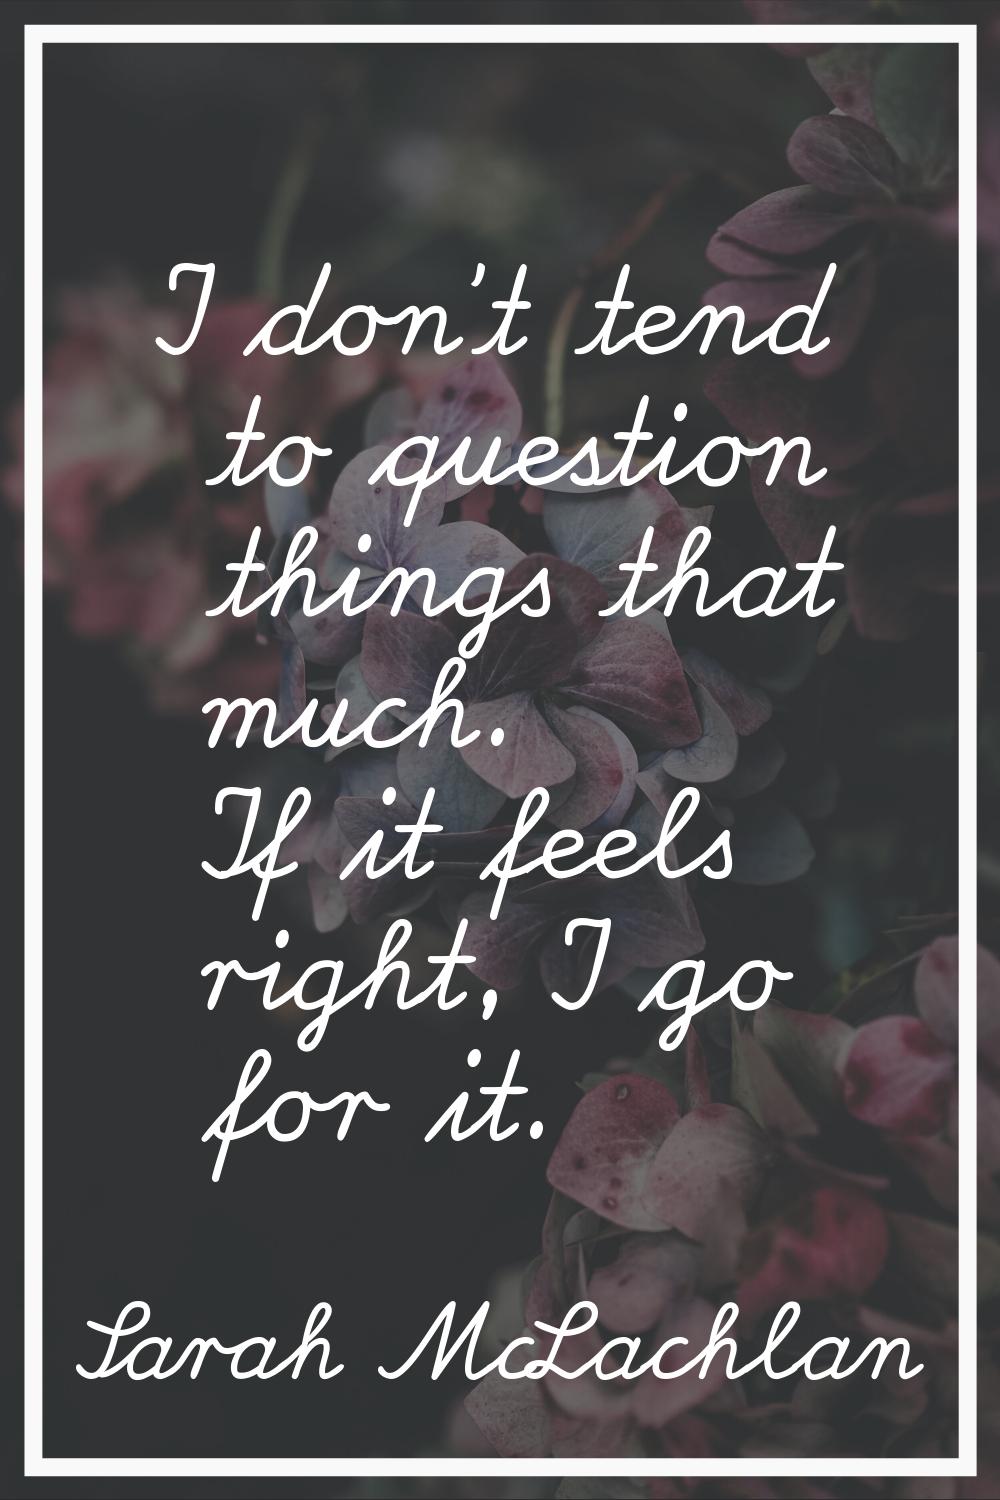 I don't tend to question things that much. If it feels right, I go for it.